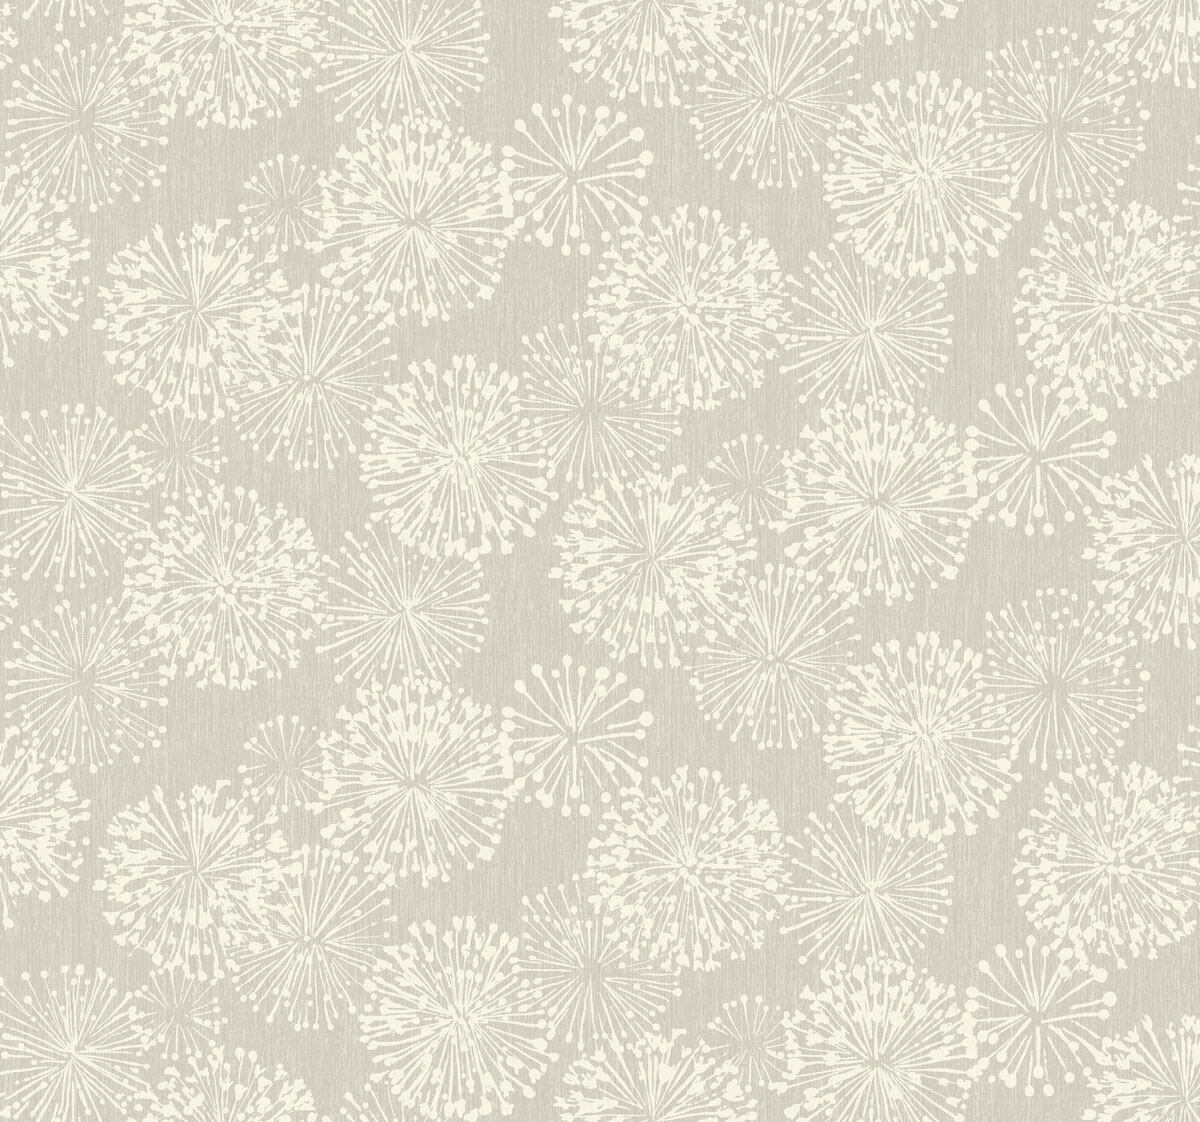 Grandeur Wallpaper by Candice Olson - SAMPLE ONLY